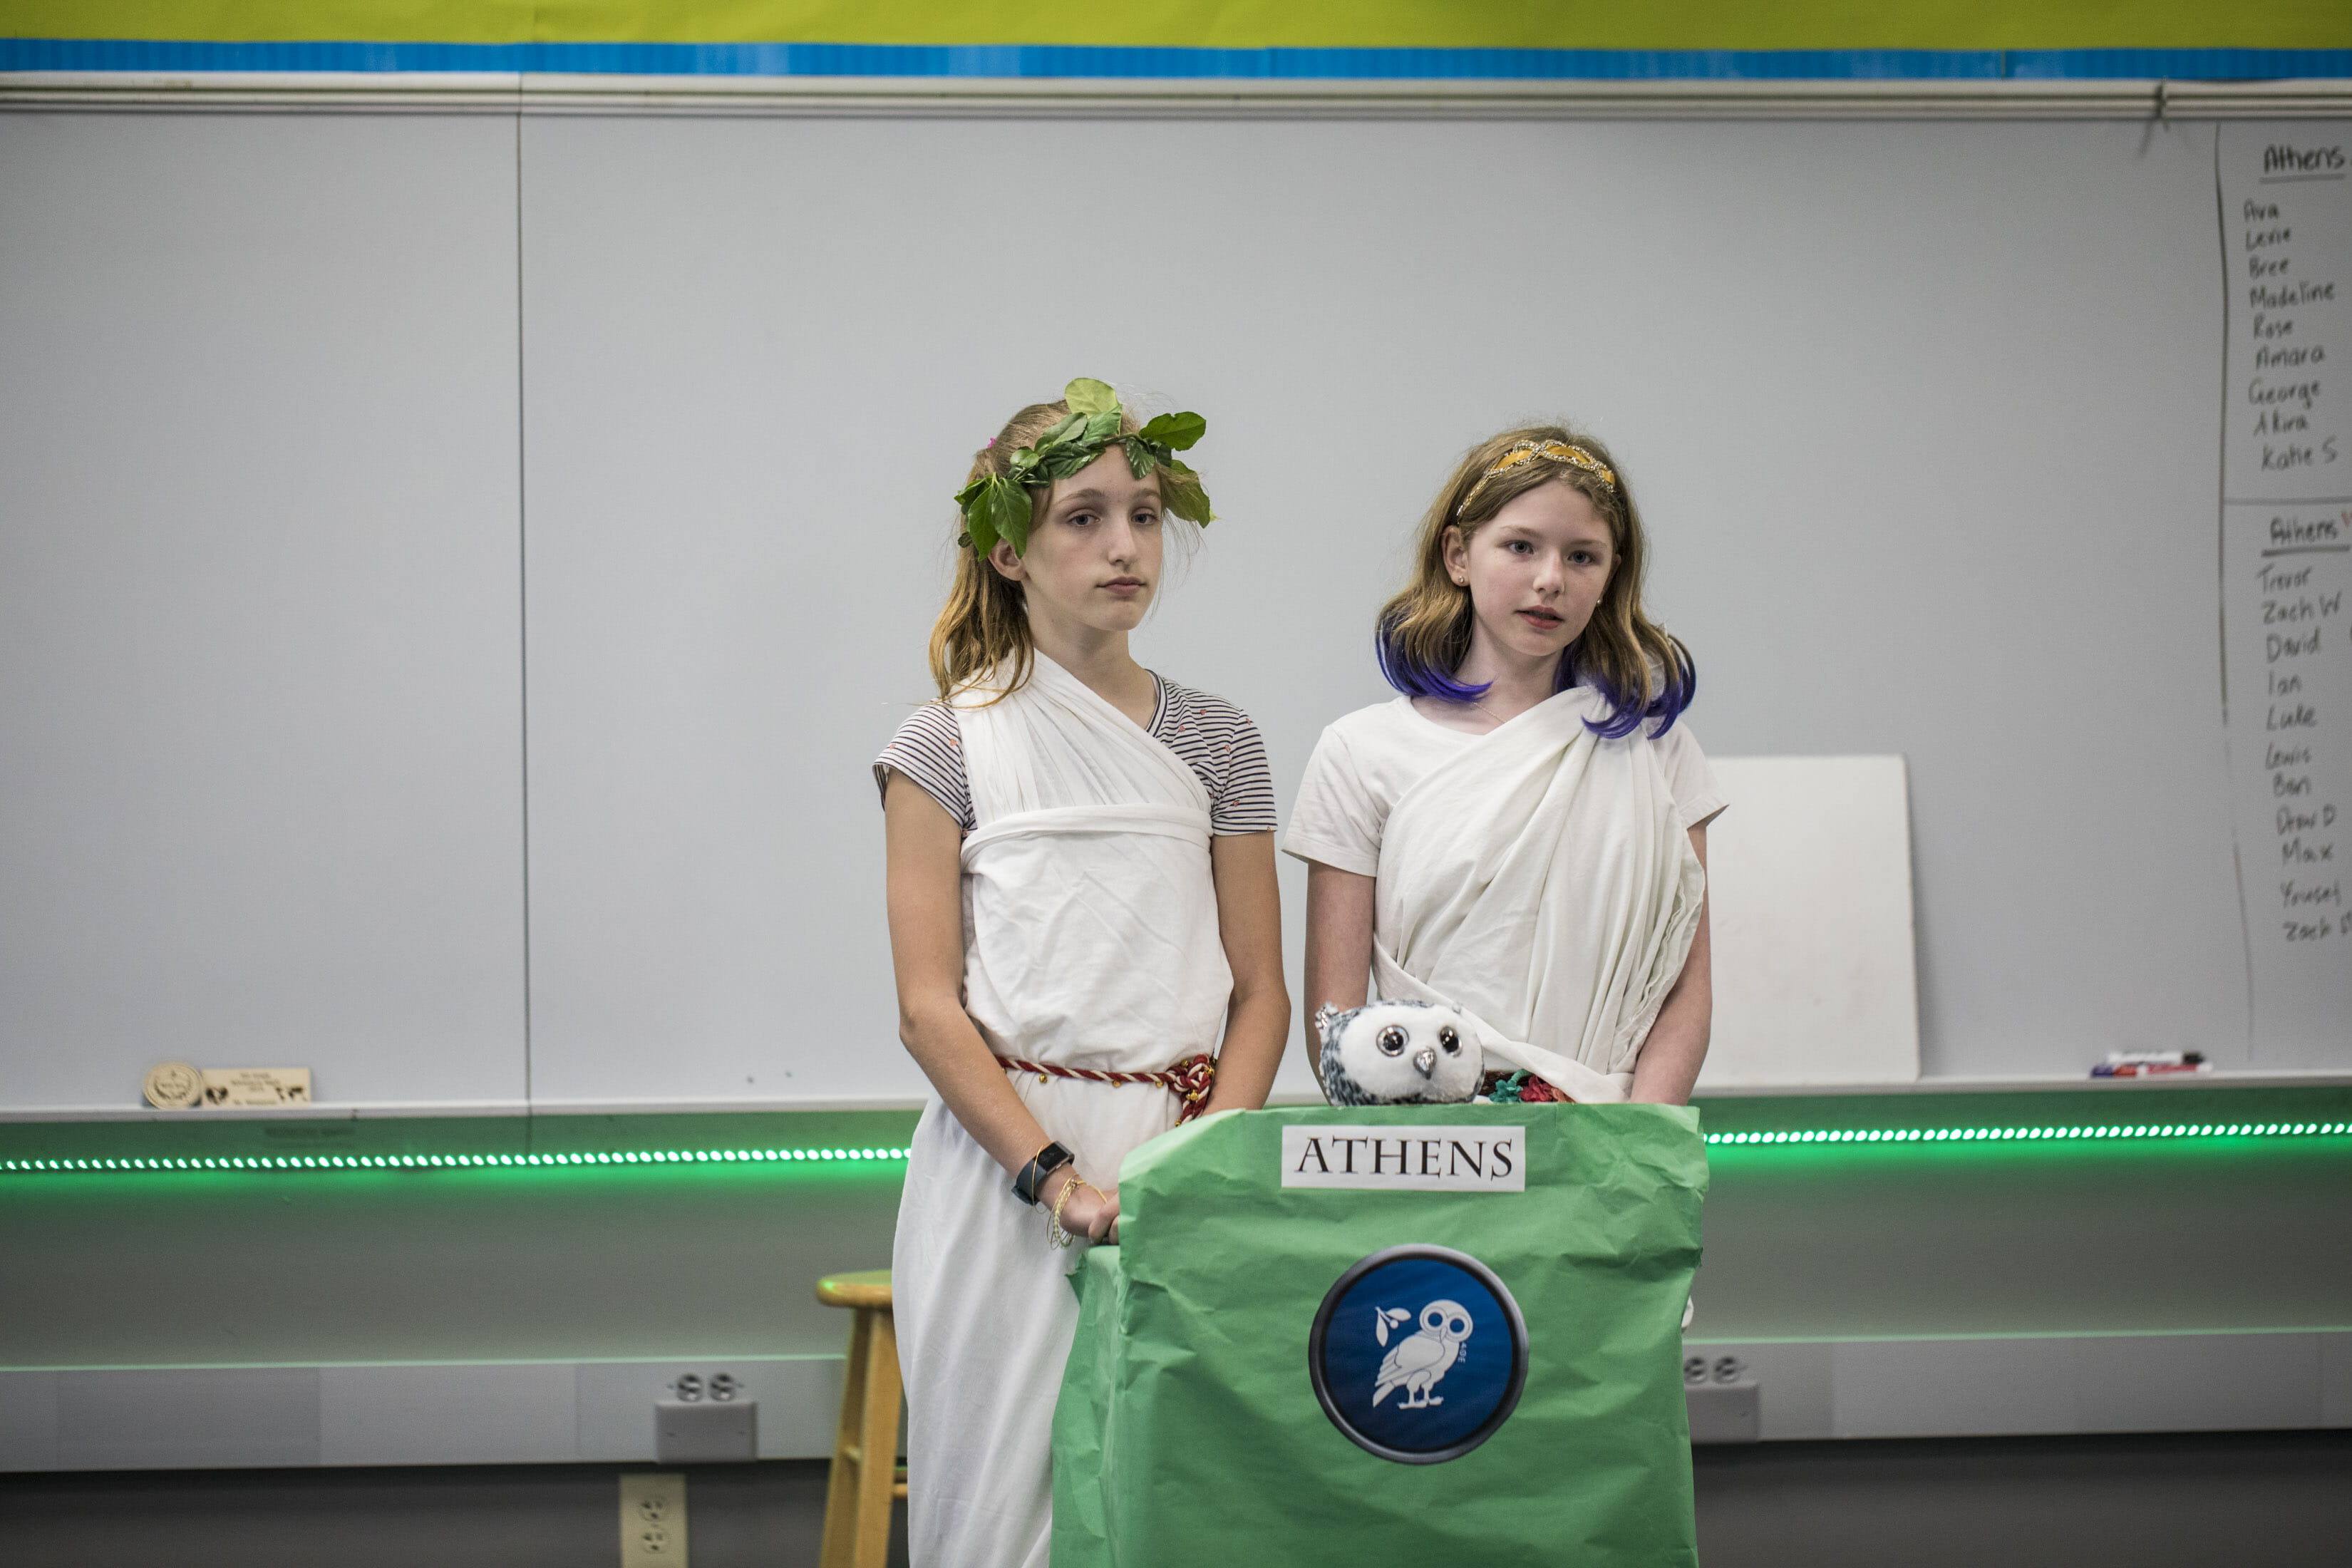 MICDS 5th grade students researched and debated which Greek city-state was better: Athens or Sparta.